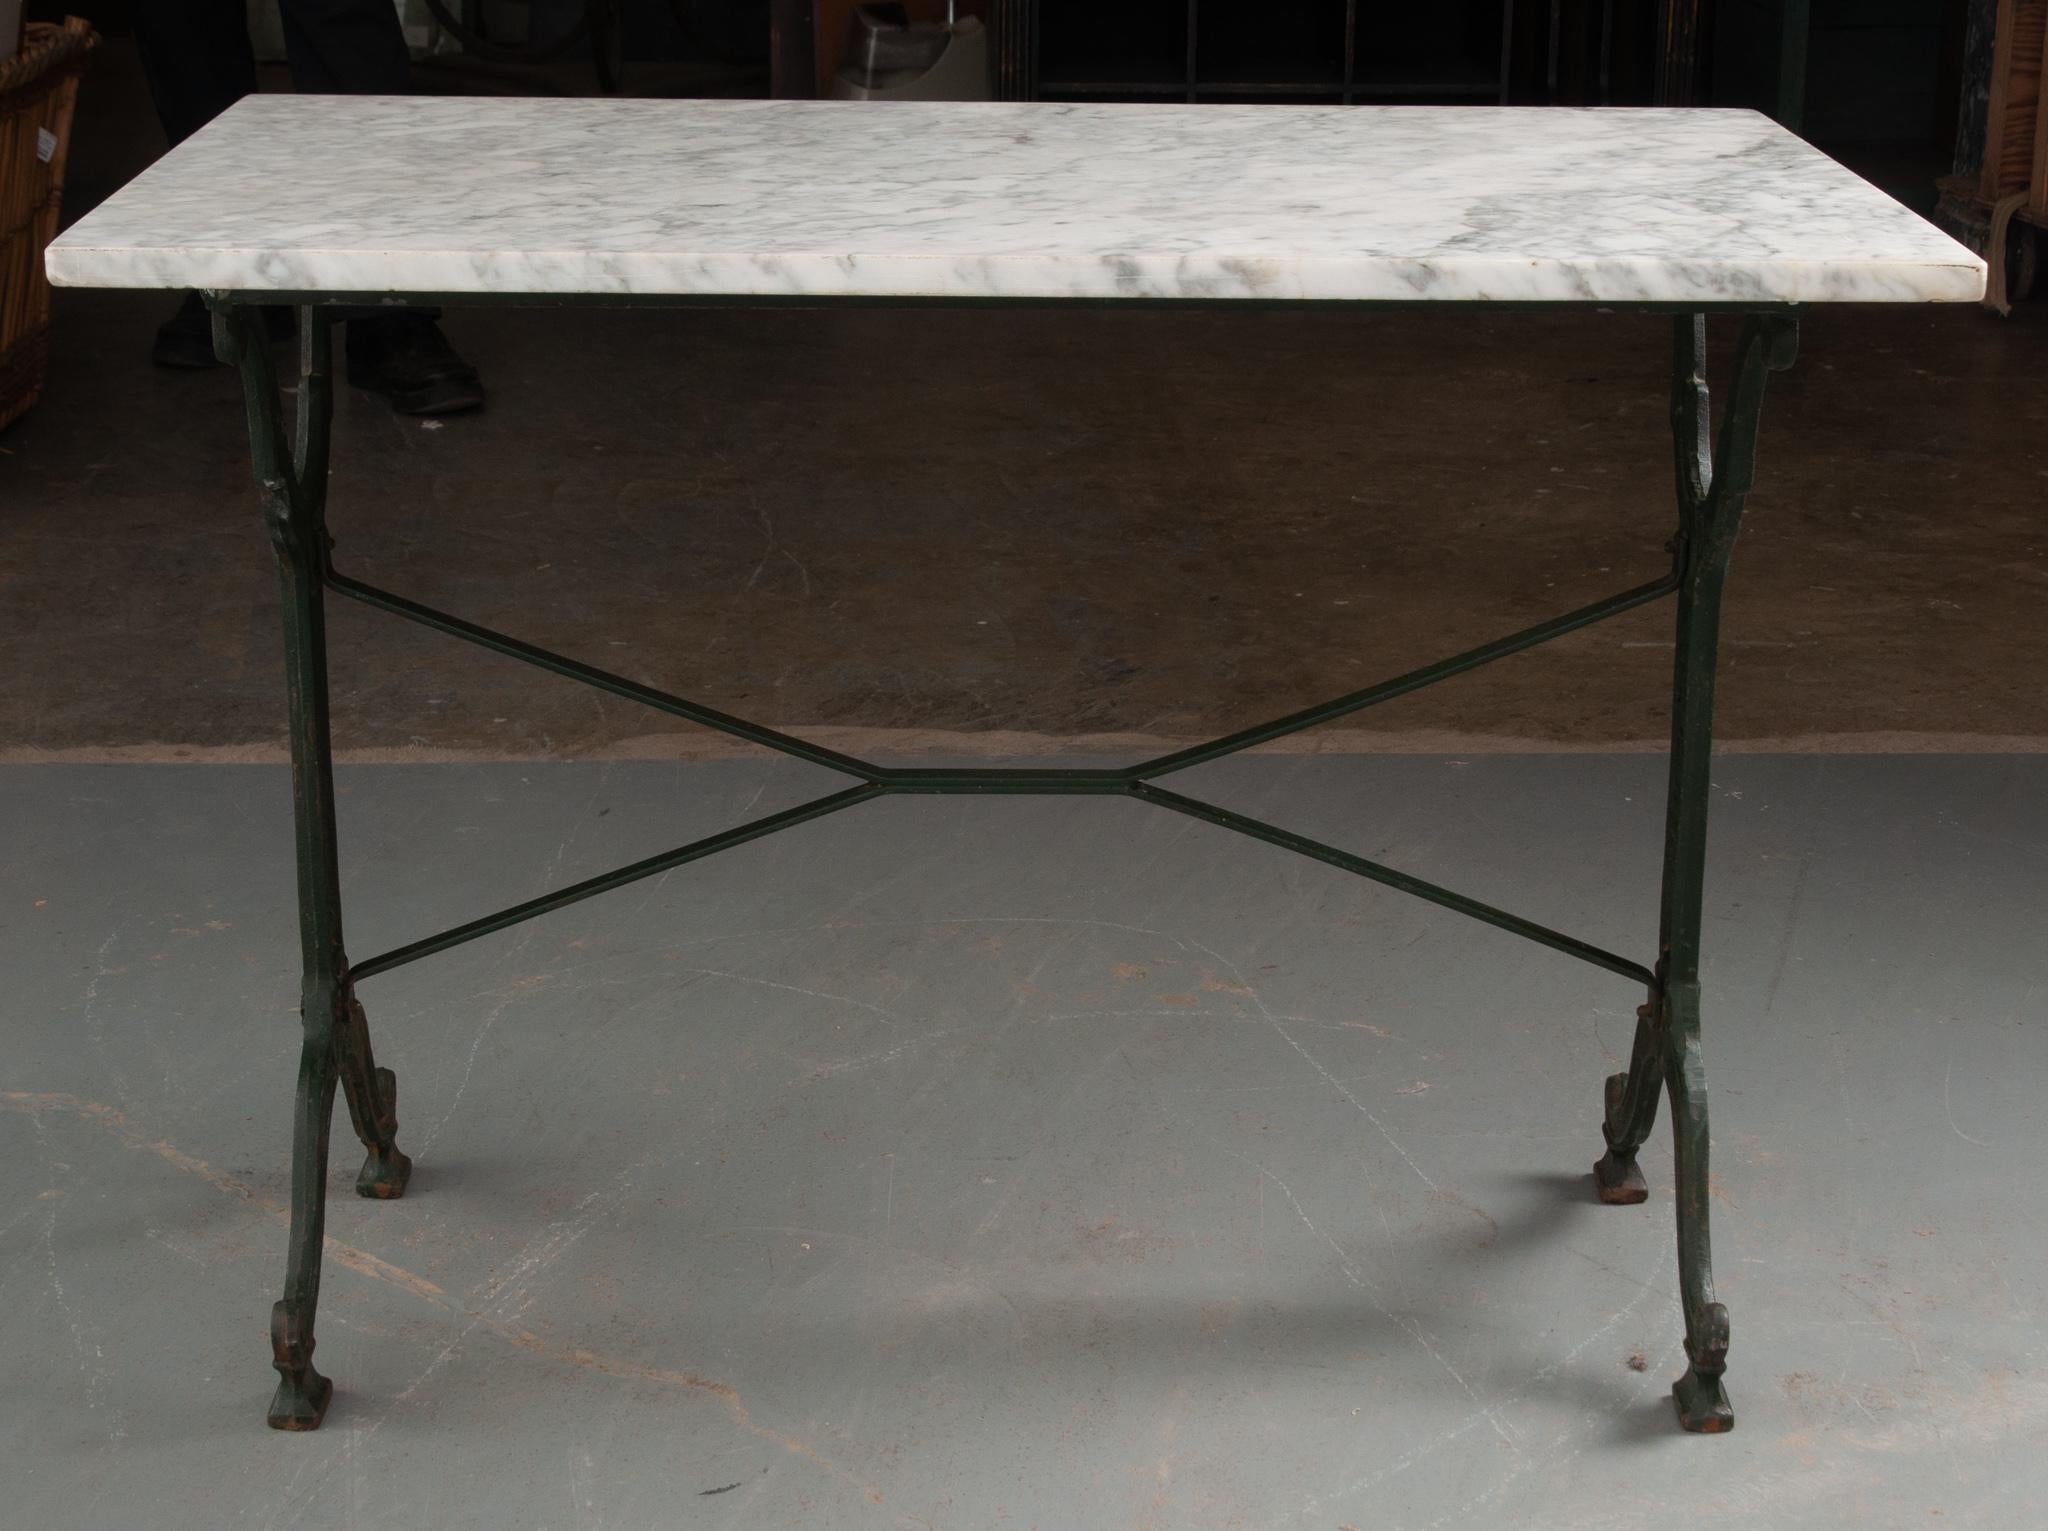 This amazing marble top garden table was made in France. The white marble top is in great condition, with gray veins and softened corners. The cast iron base is classically styled, with fashioned upright supports, linked by two iron stretcher